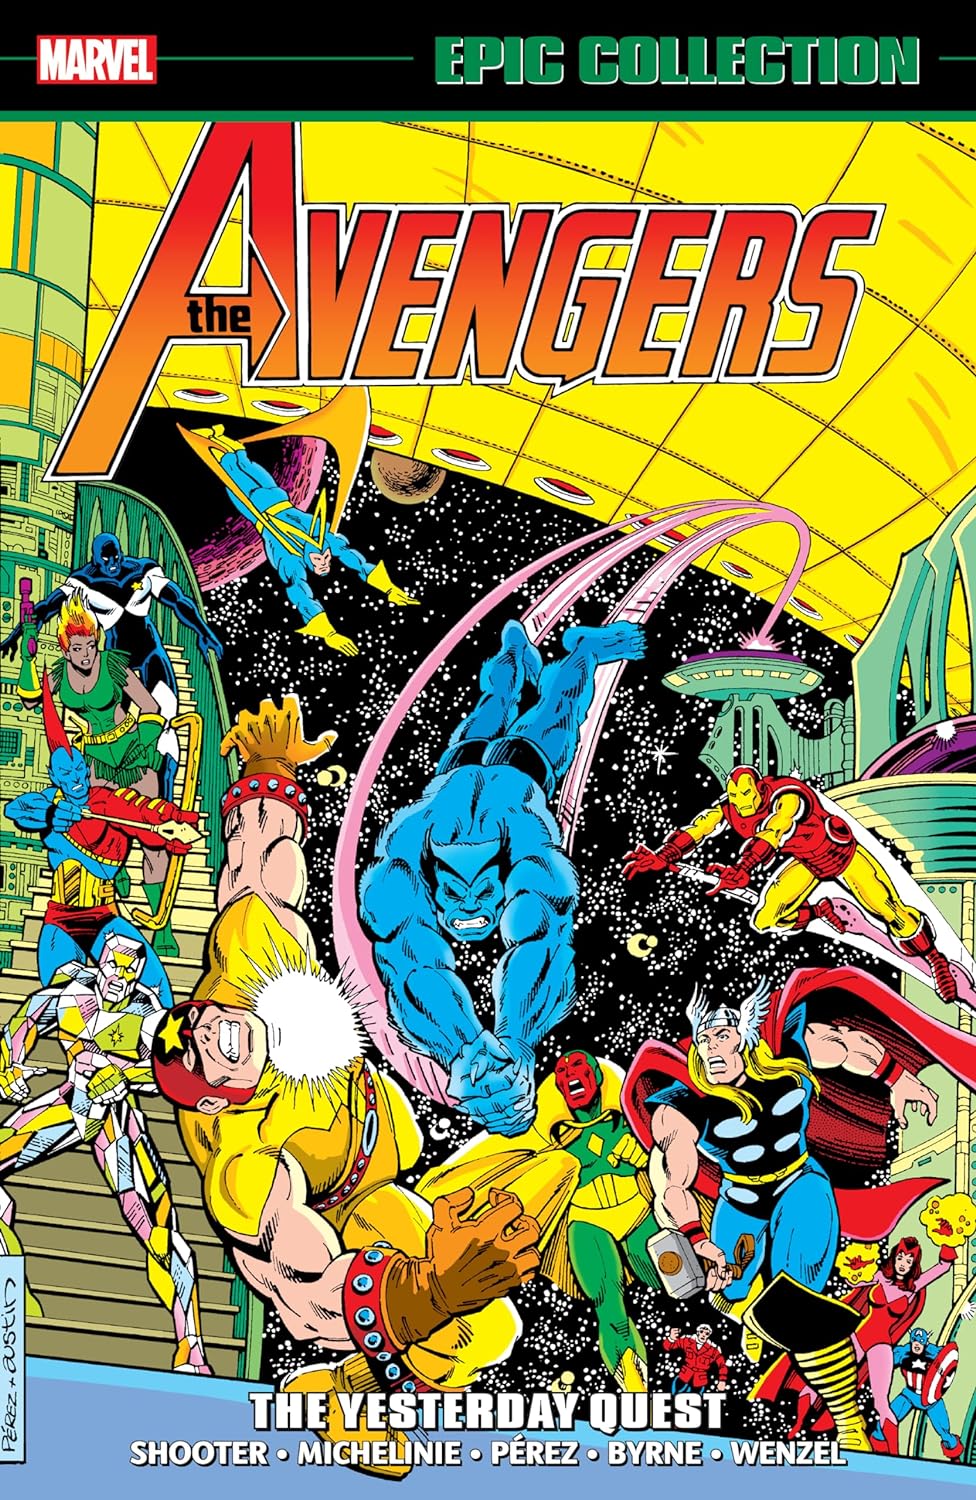 Avengers Epic Collection: The Yesterday Quest (Trade Paperback)